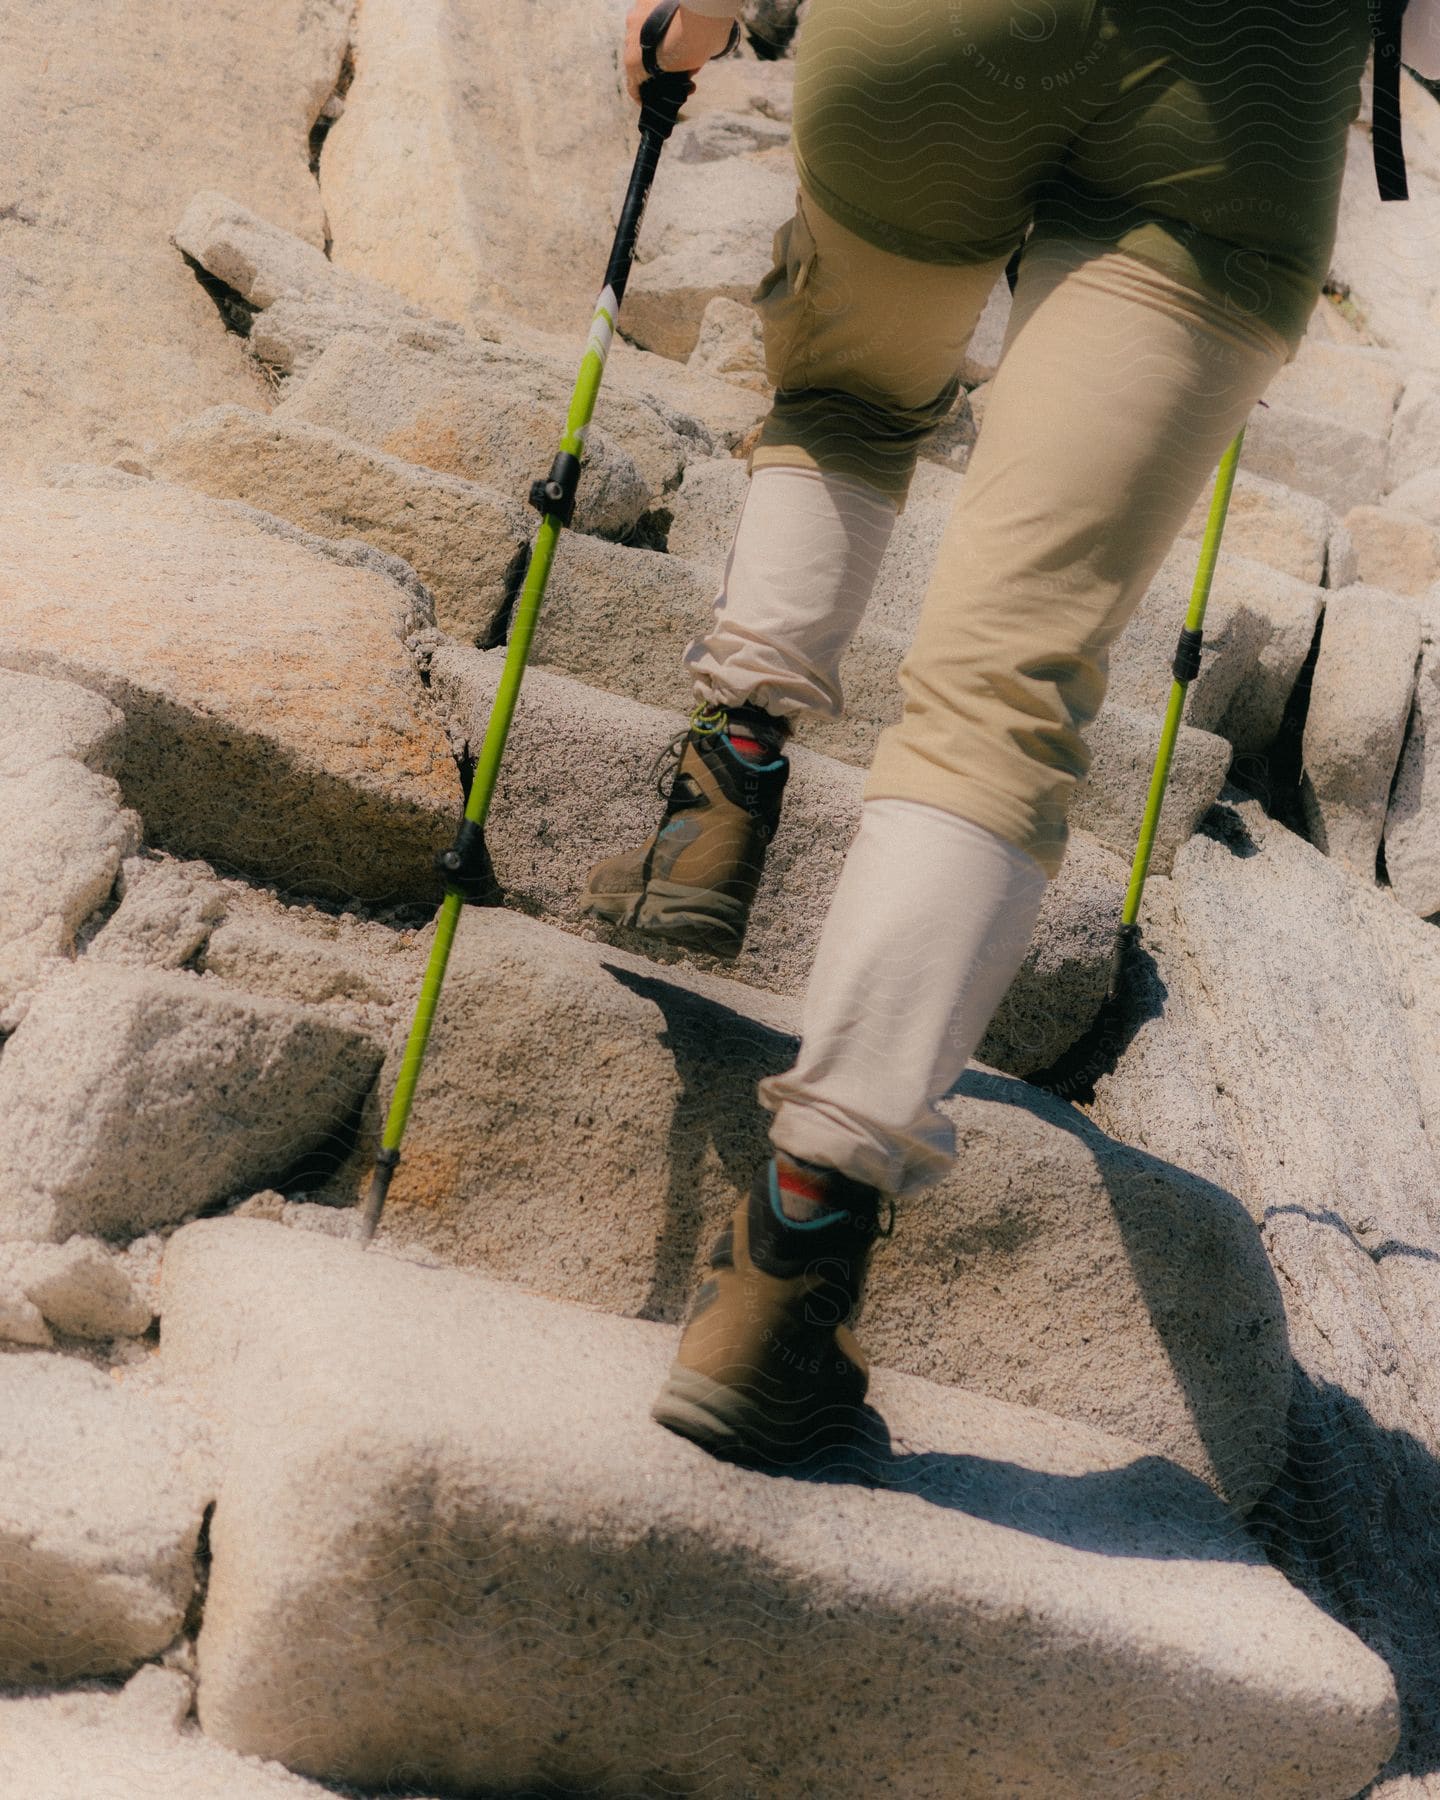 A hiker in hiking boots and cargo pants ascends rocky terrain with green hiking poles.